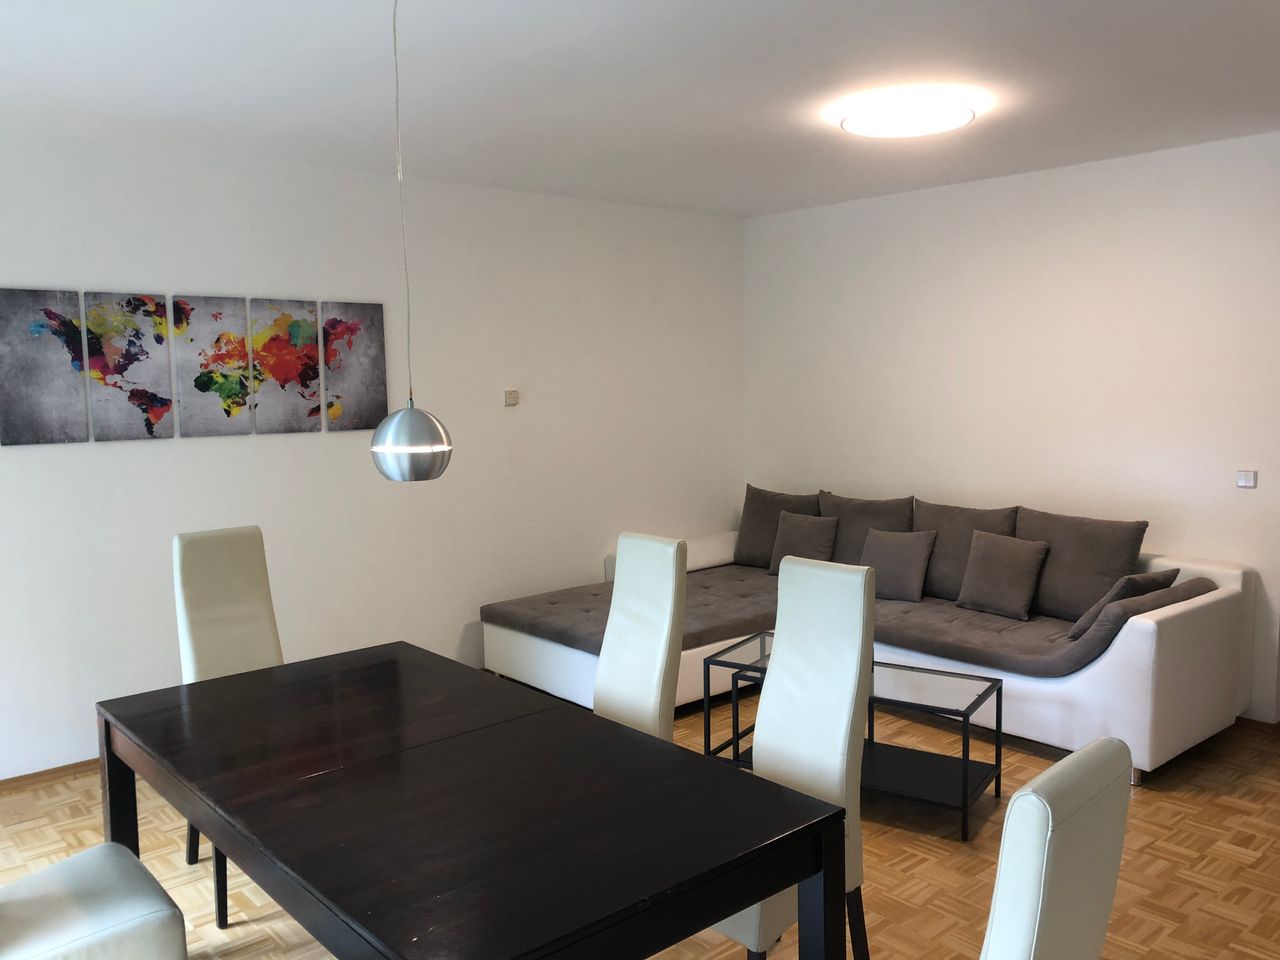 Modern apartment with 2 balconies and 3 bedrooms in Pankow - right next to Brosepark, 20 minutes by tram to Berlin-Mitte